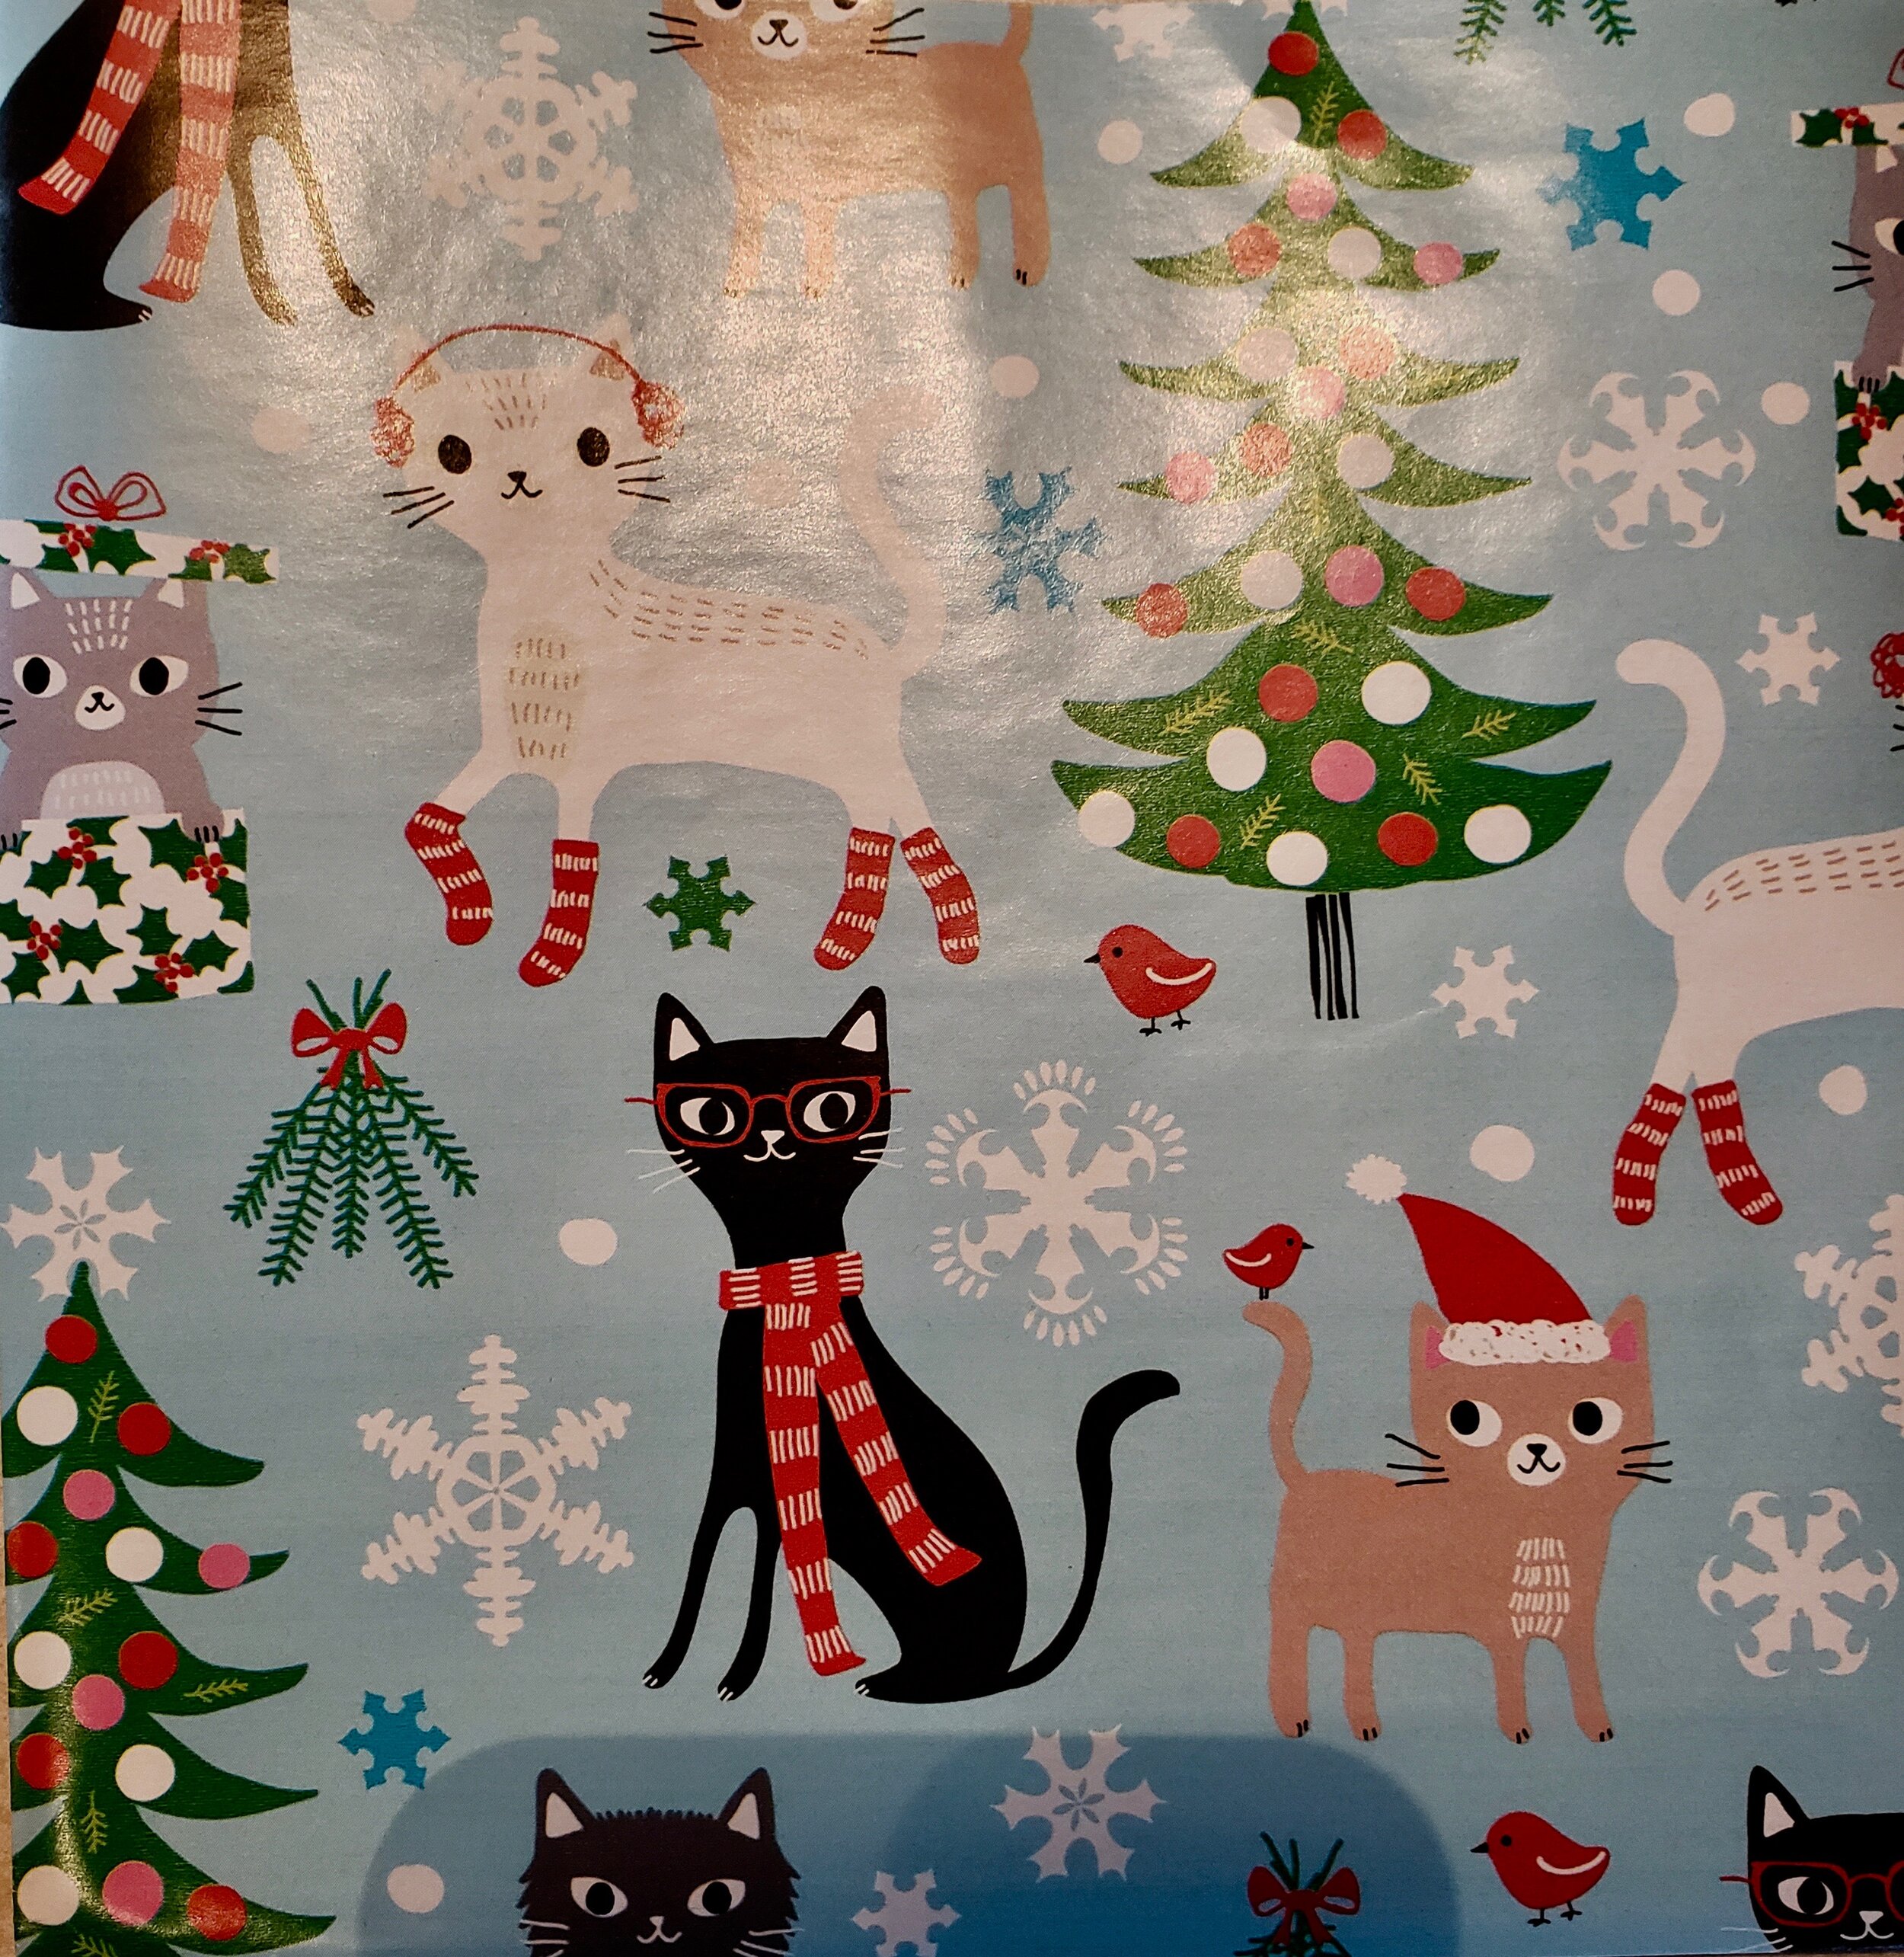 Don't You Wish This Was Your Wrapping Paper?.jpg